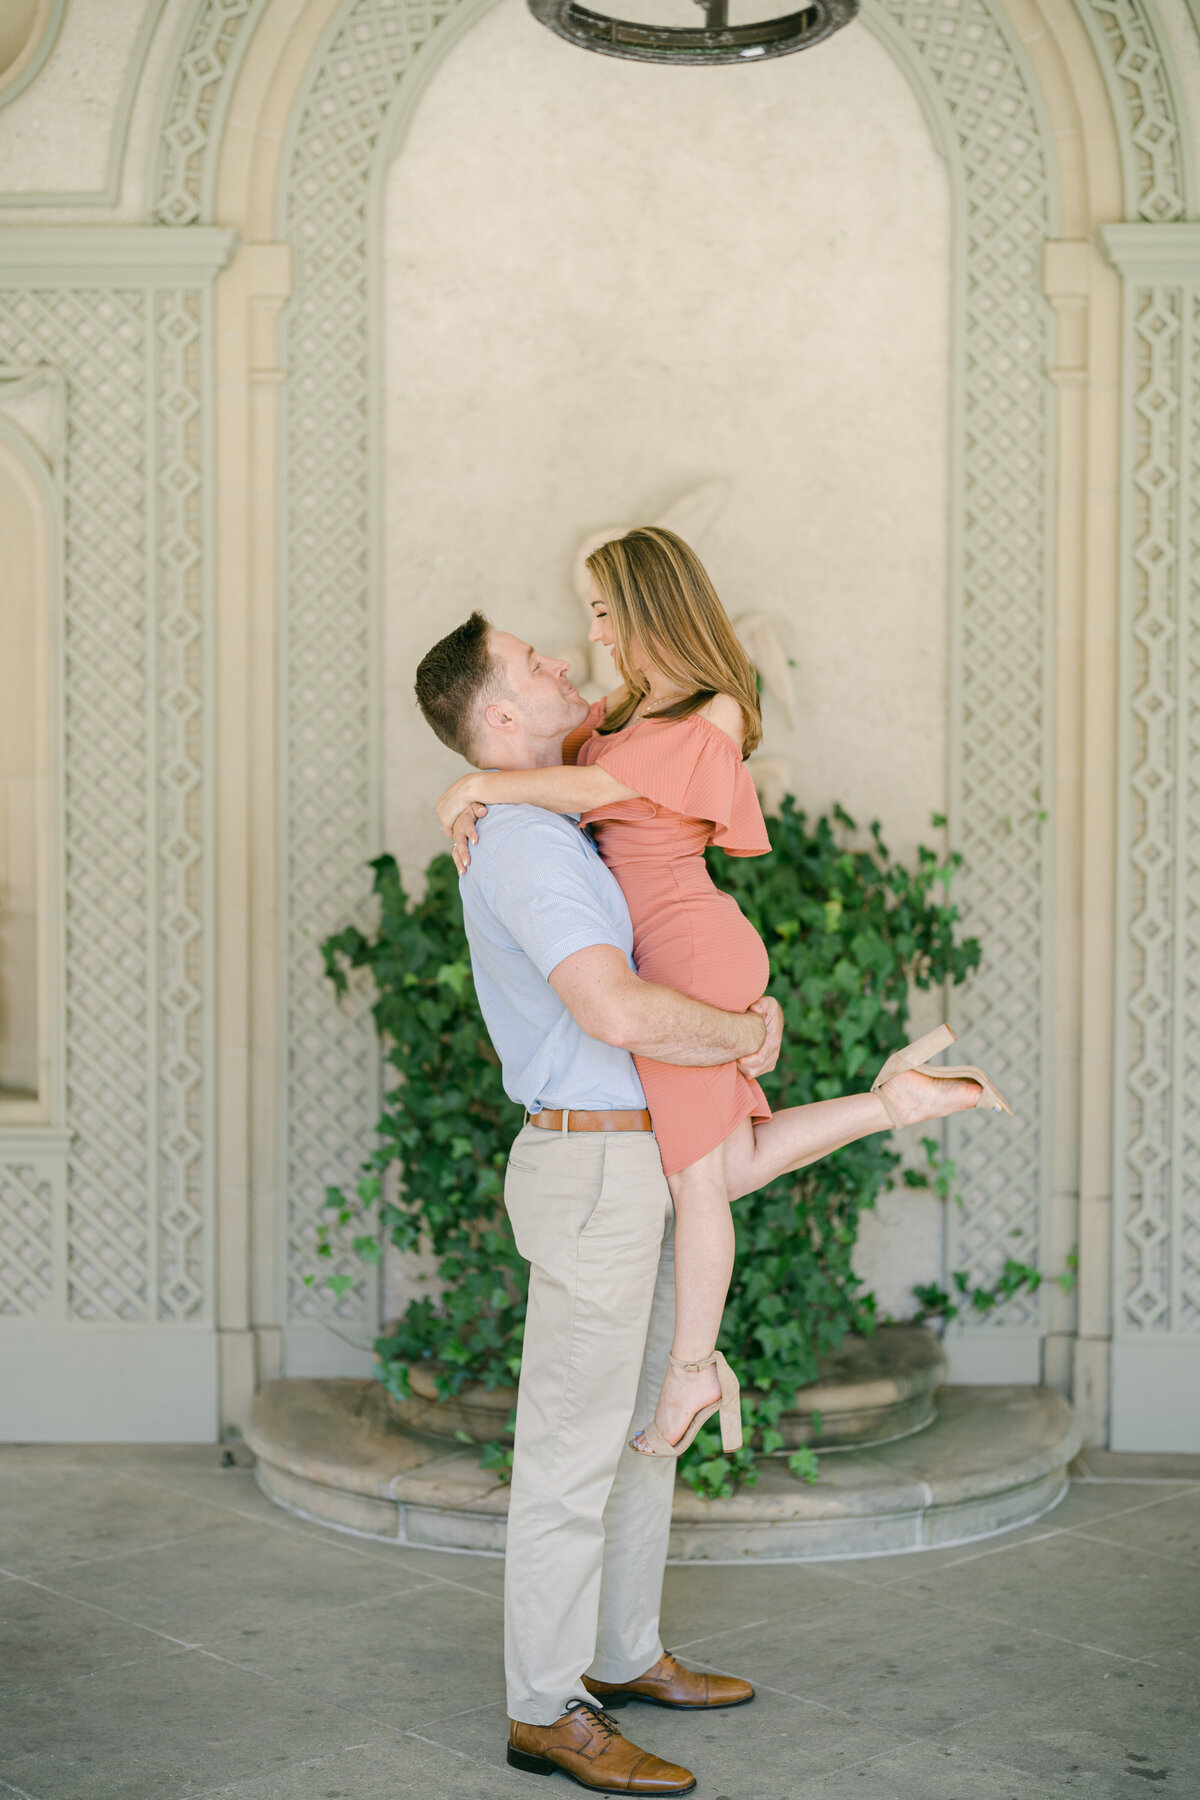 Romantic-Engagement-Session-at-a-Newport-Rhode-Island-Mansion